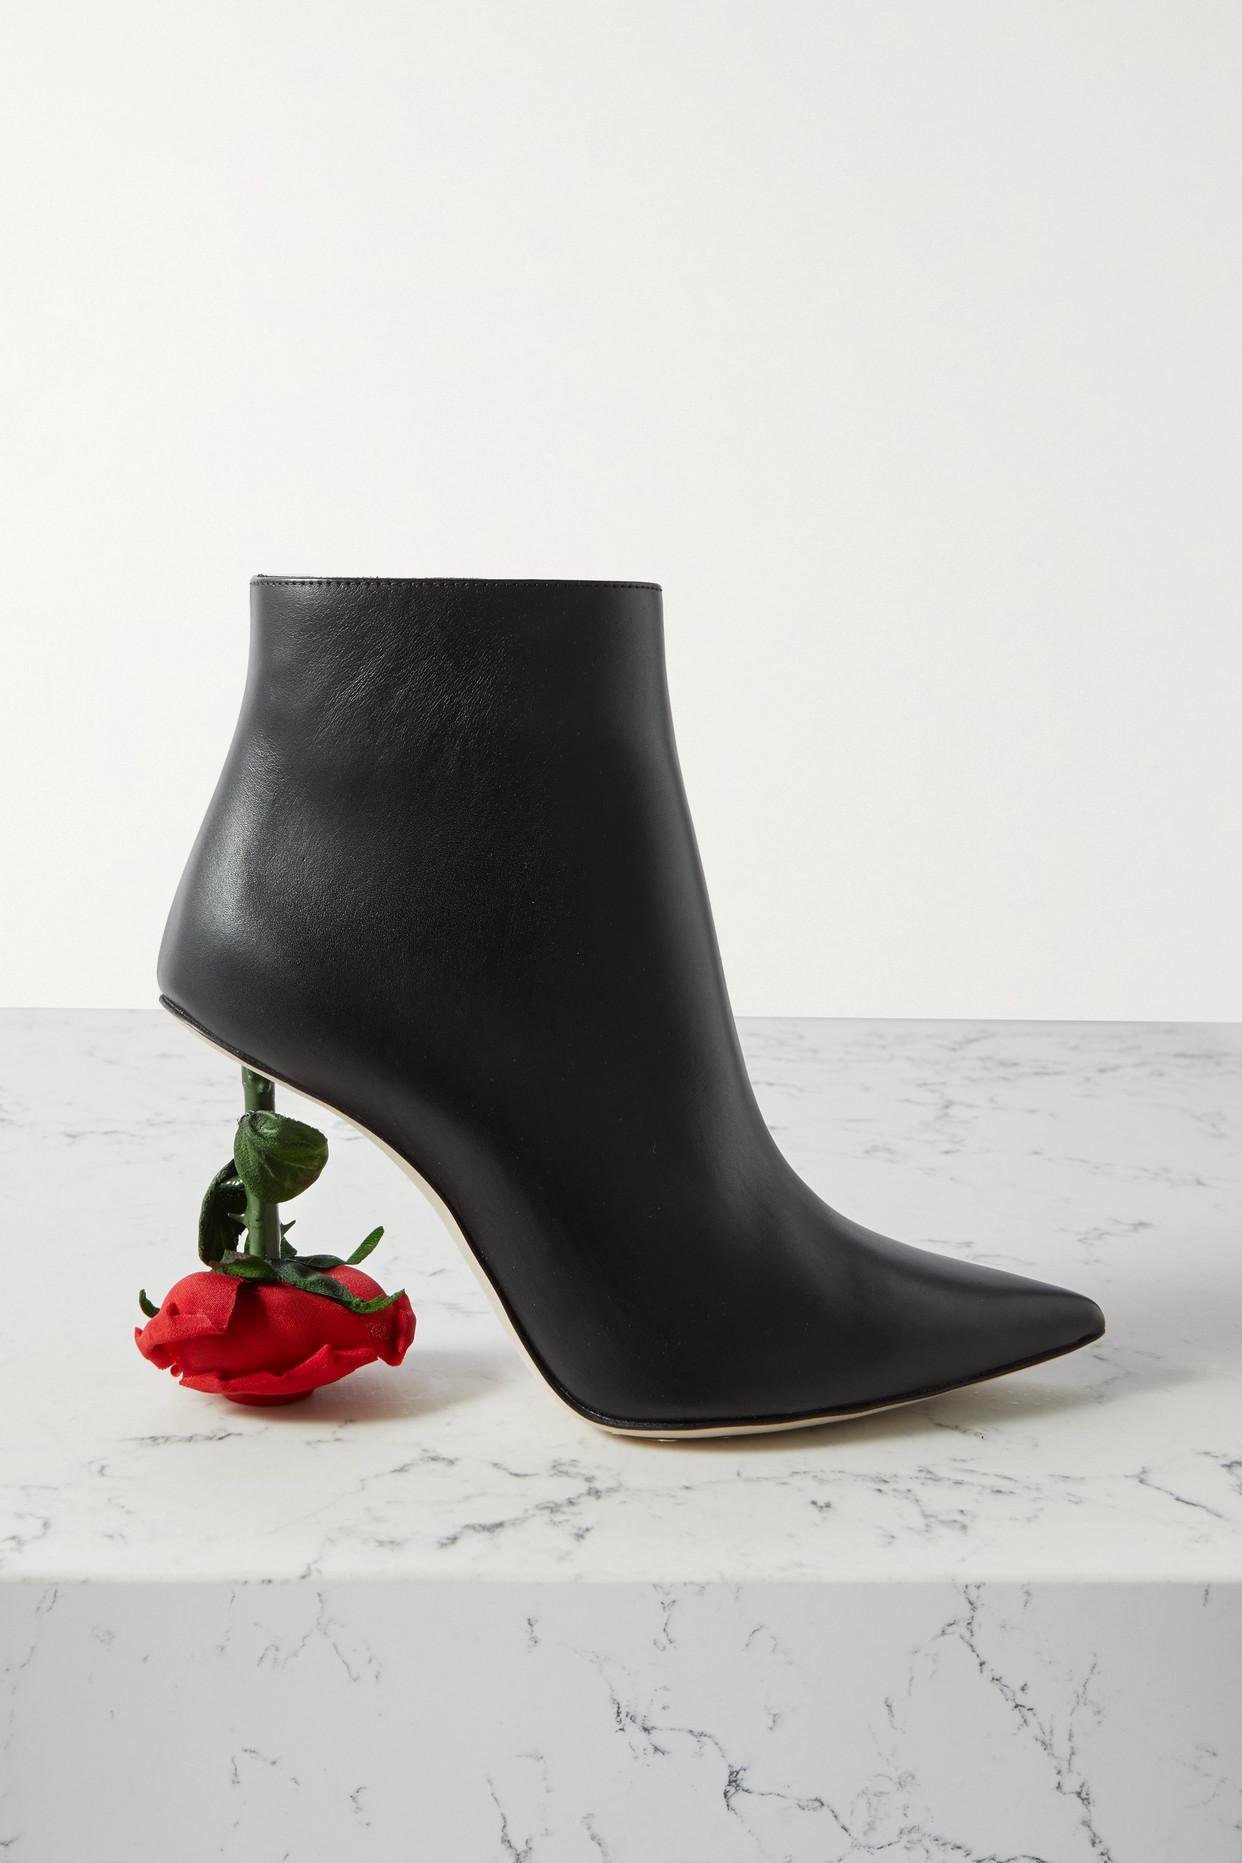 Loewe Rose Embellished Leather Ankle Boots in Black | Lyst